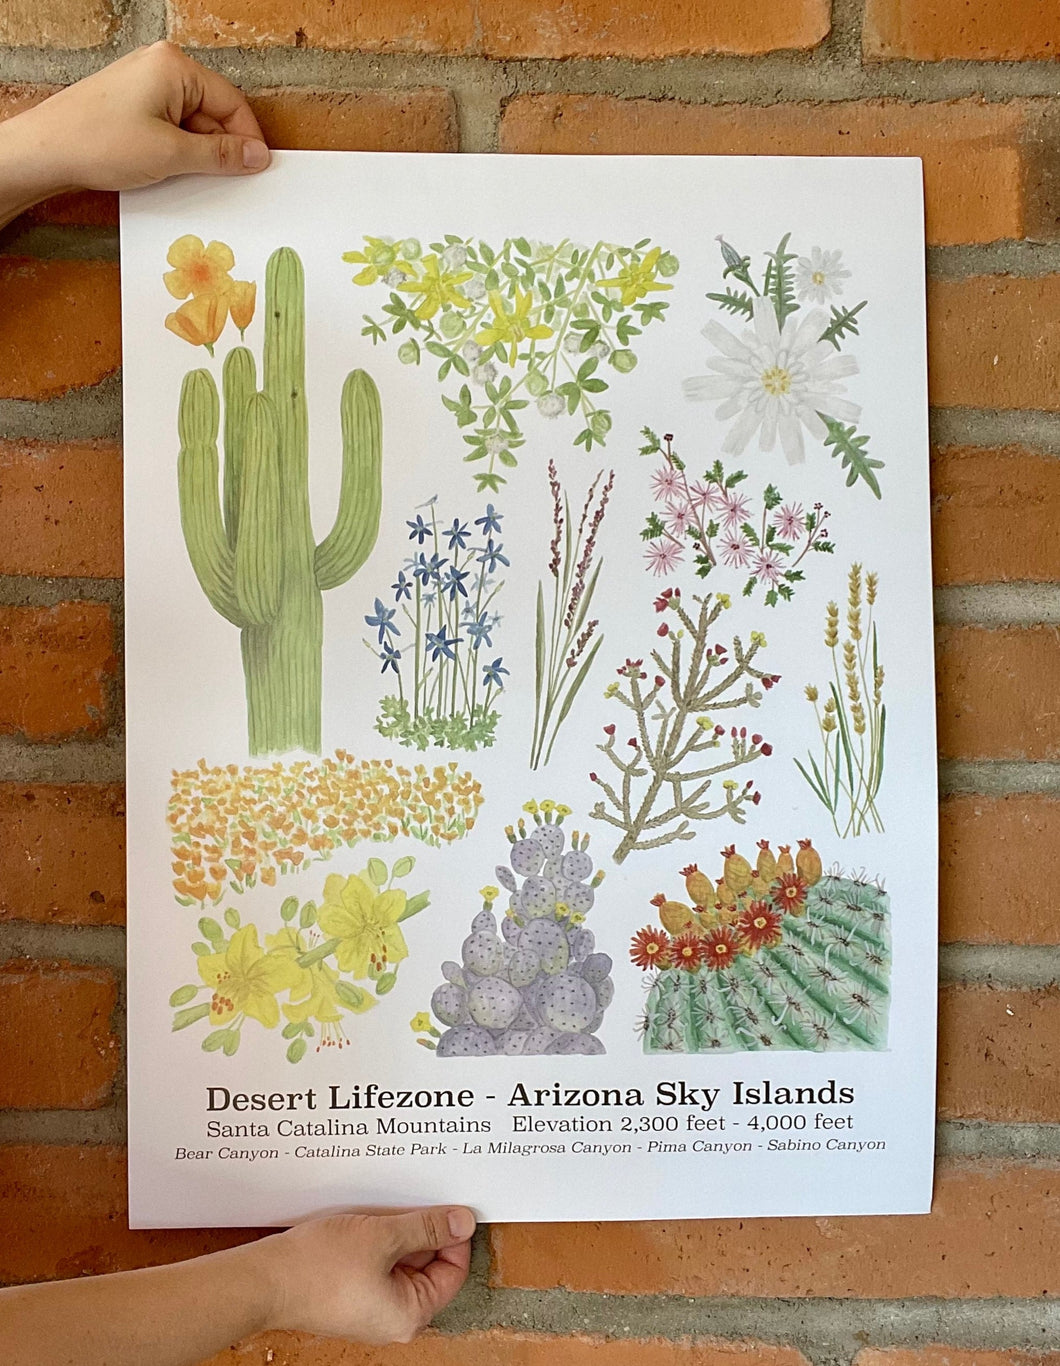 Photo of Desert Lifezone poster showing watercolor artwork of plants and flowers found in the Desert Lifezone of Arizona